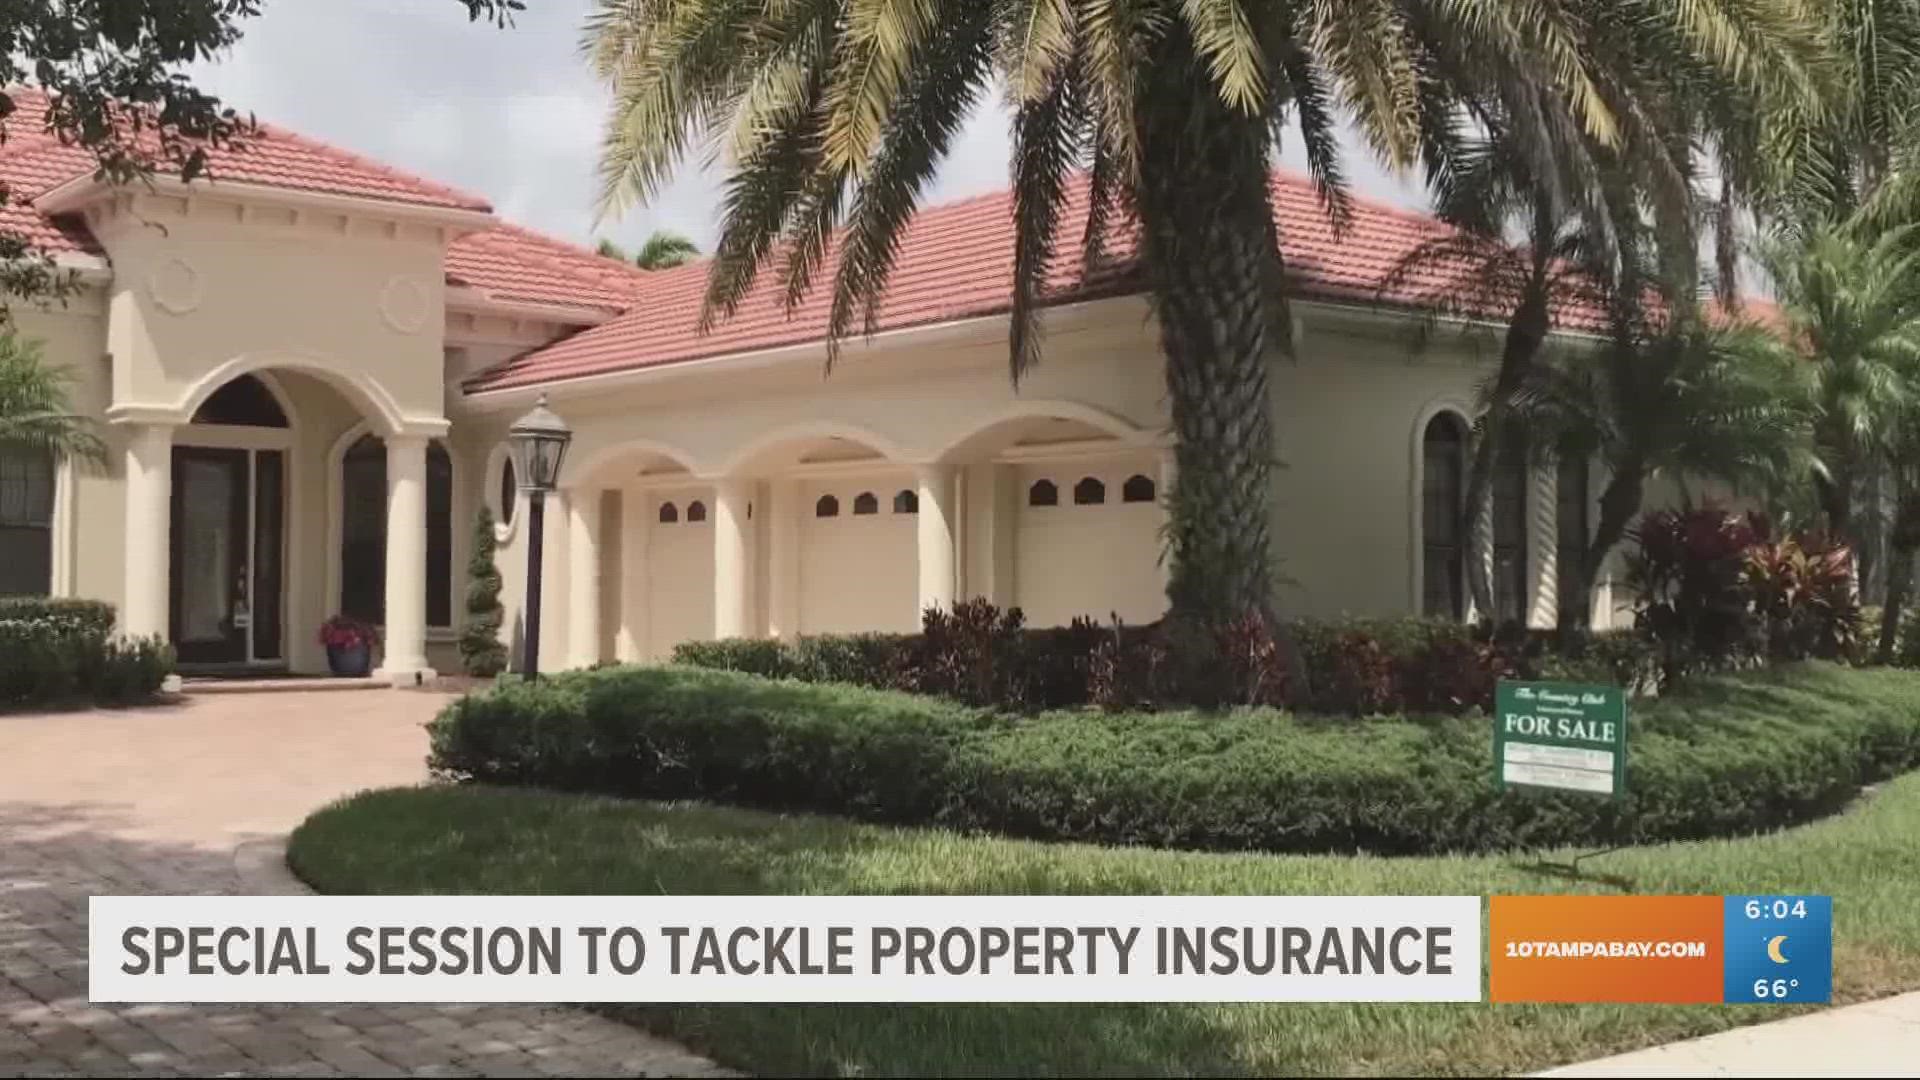 Lawmakers in May passed legislation creating a $2 billion reinsurance program, offering grants to homeowners who retrofit properties.